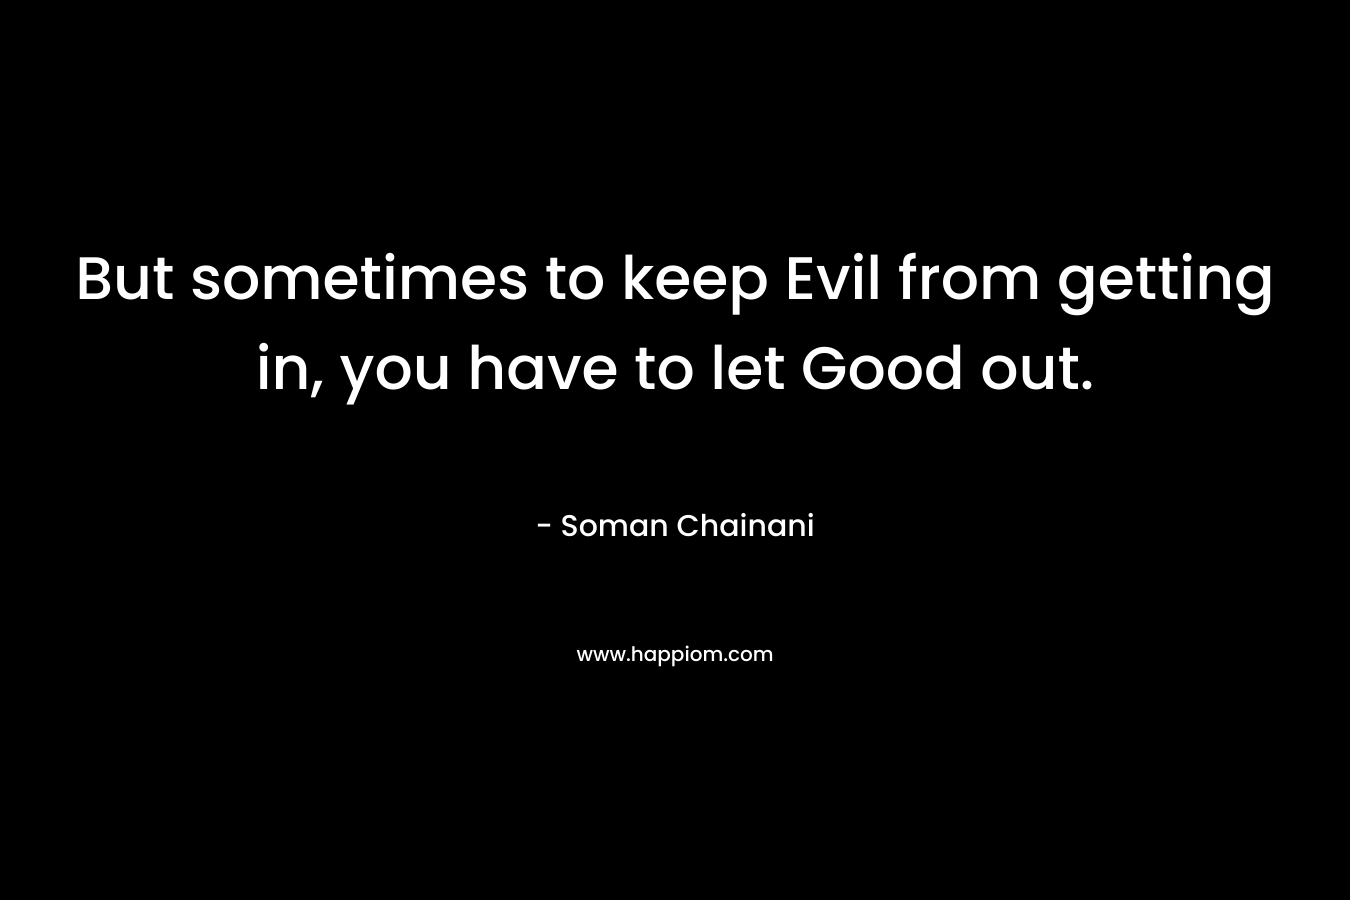 But sometimes to keep Evil from getting in, you have to let Good out. – Soman Chainani